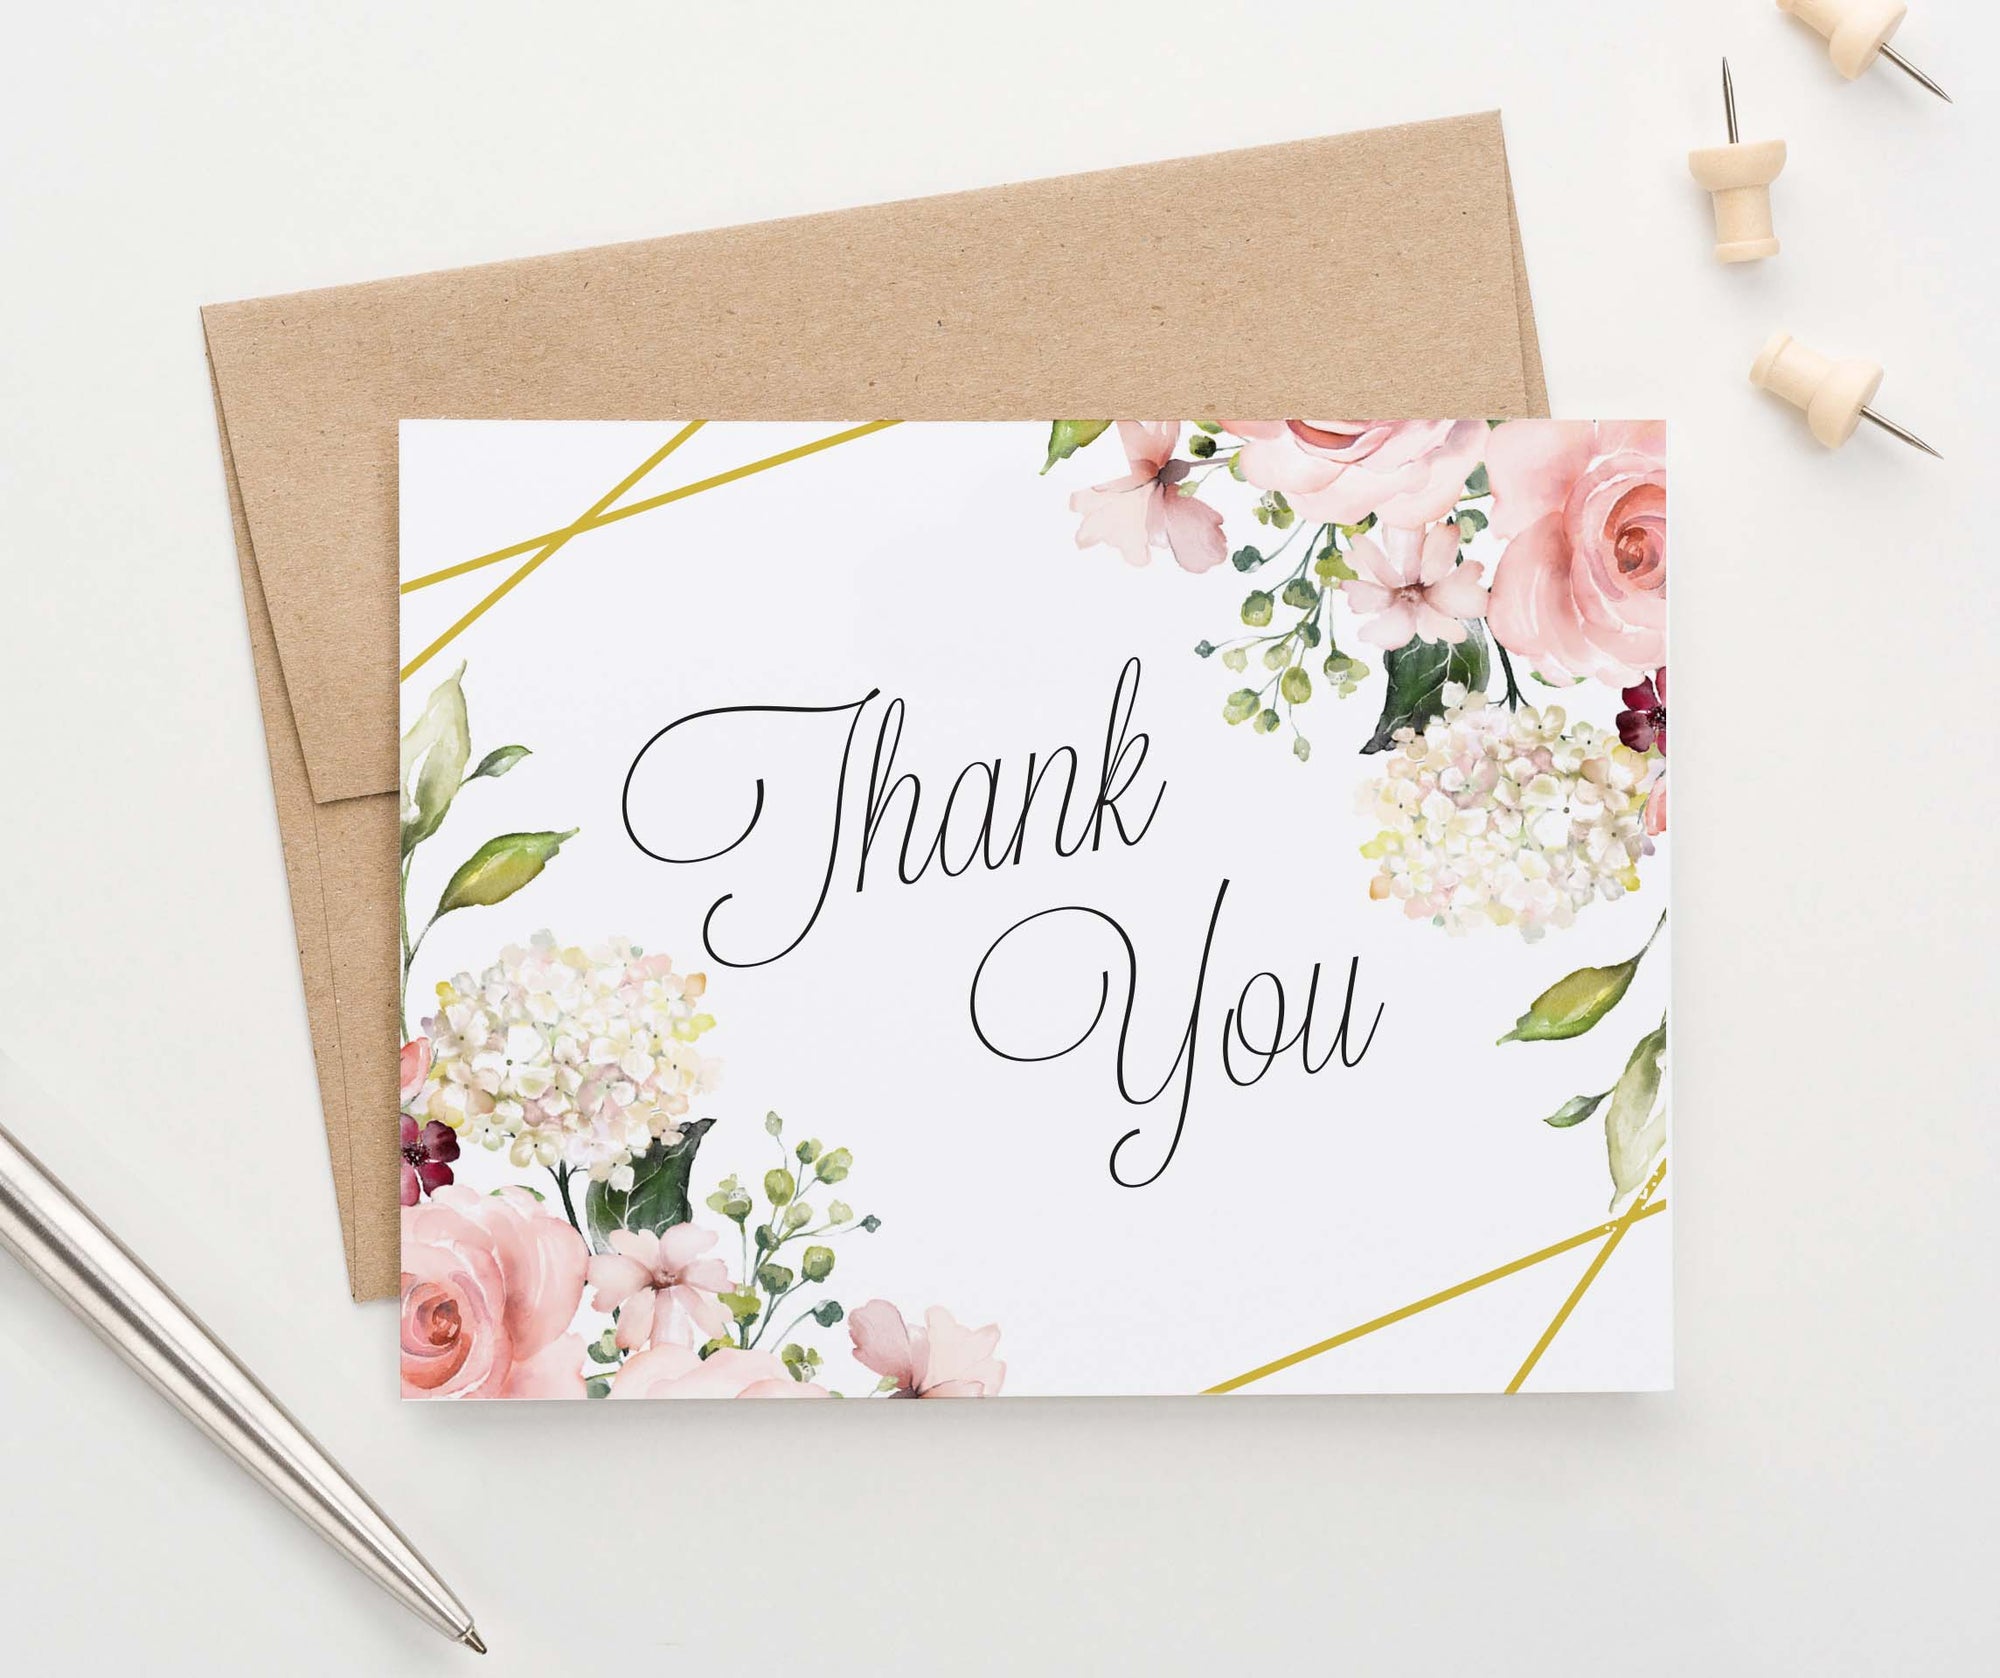 TY063 elegant floral corners folded thank you cards wedding gold